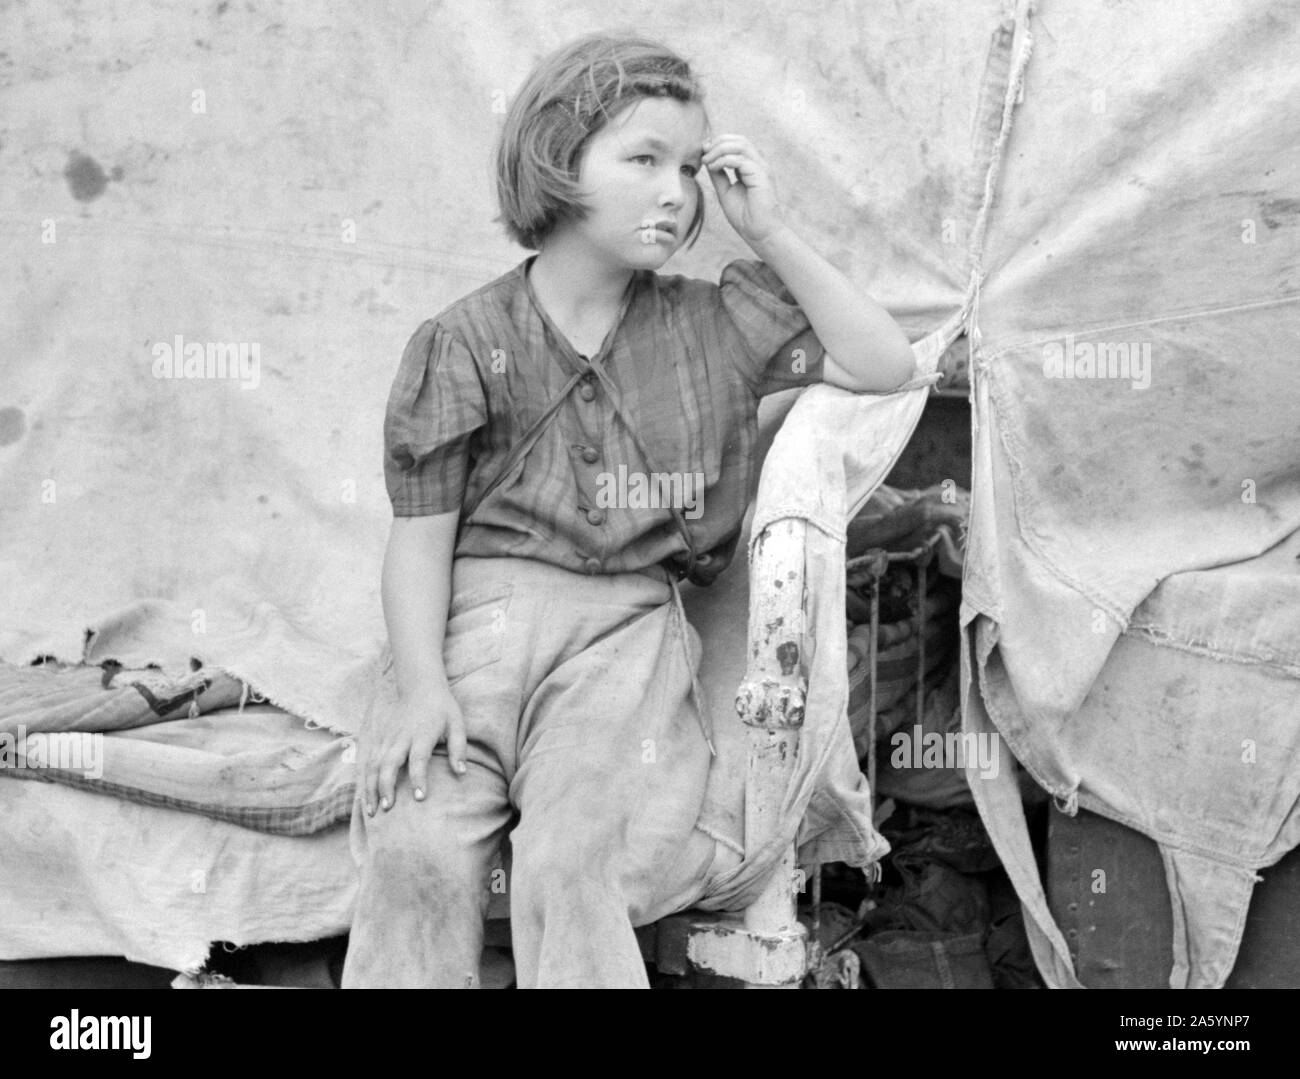 Child of migrant worker sitting on bed in tent home of cotton picking sacks, Harlingen, Texas By Russell Lee, 1903-1986, photographer 19390101 Stock Photo